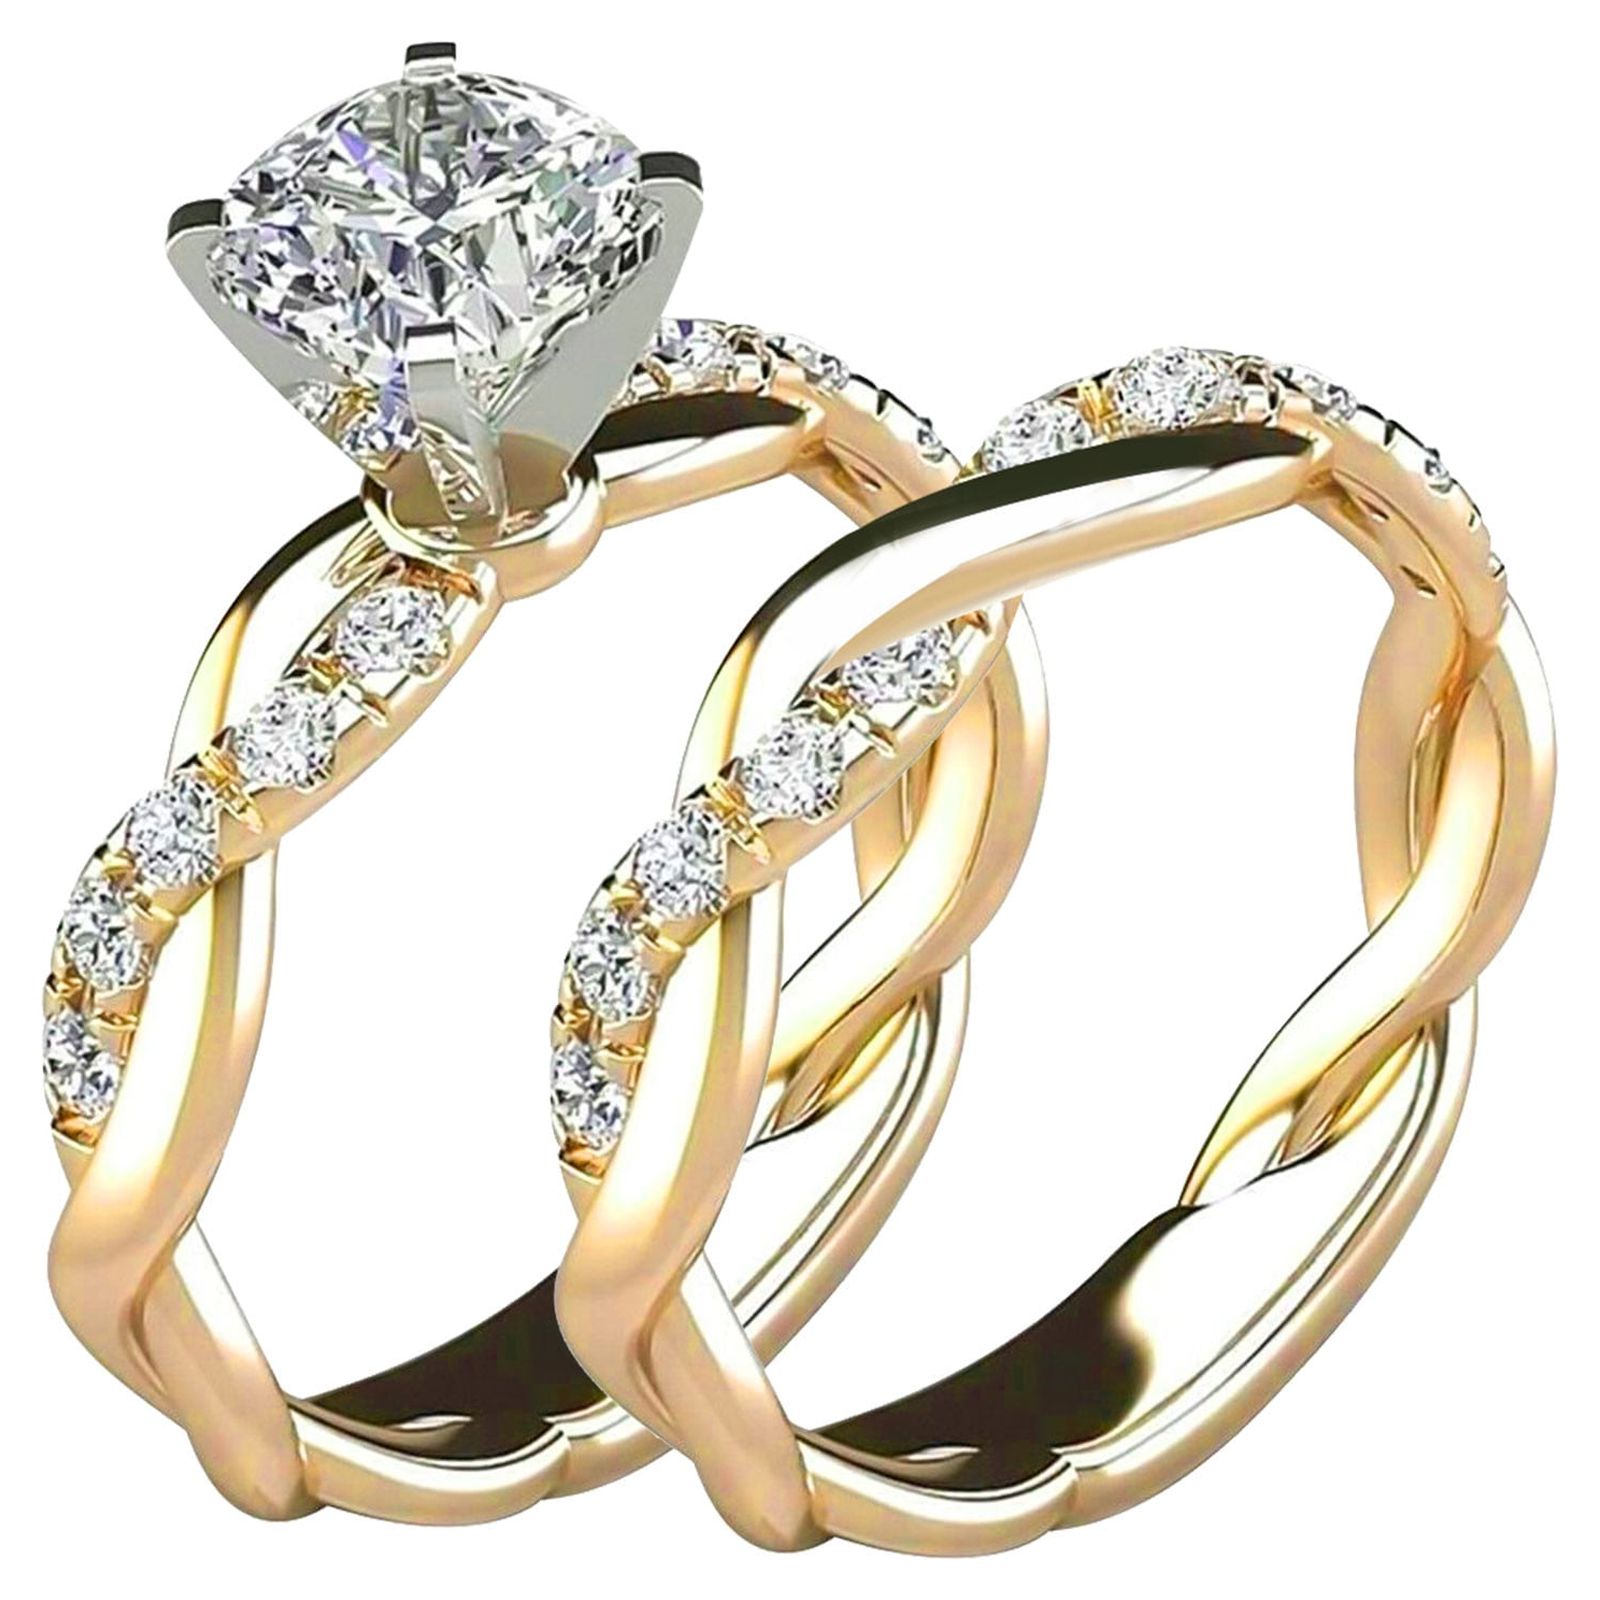 Fridja 2 Carats Alloy Bridal Set Cubic Zirconia Engagement Wedding Ring Bands with Round and Princess Cut - image 1 of 9